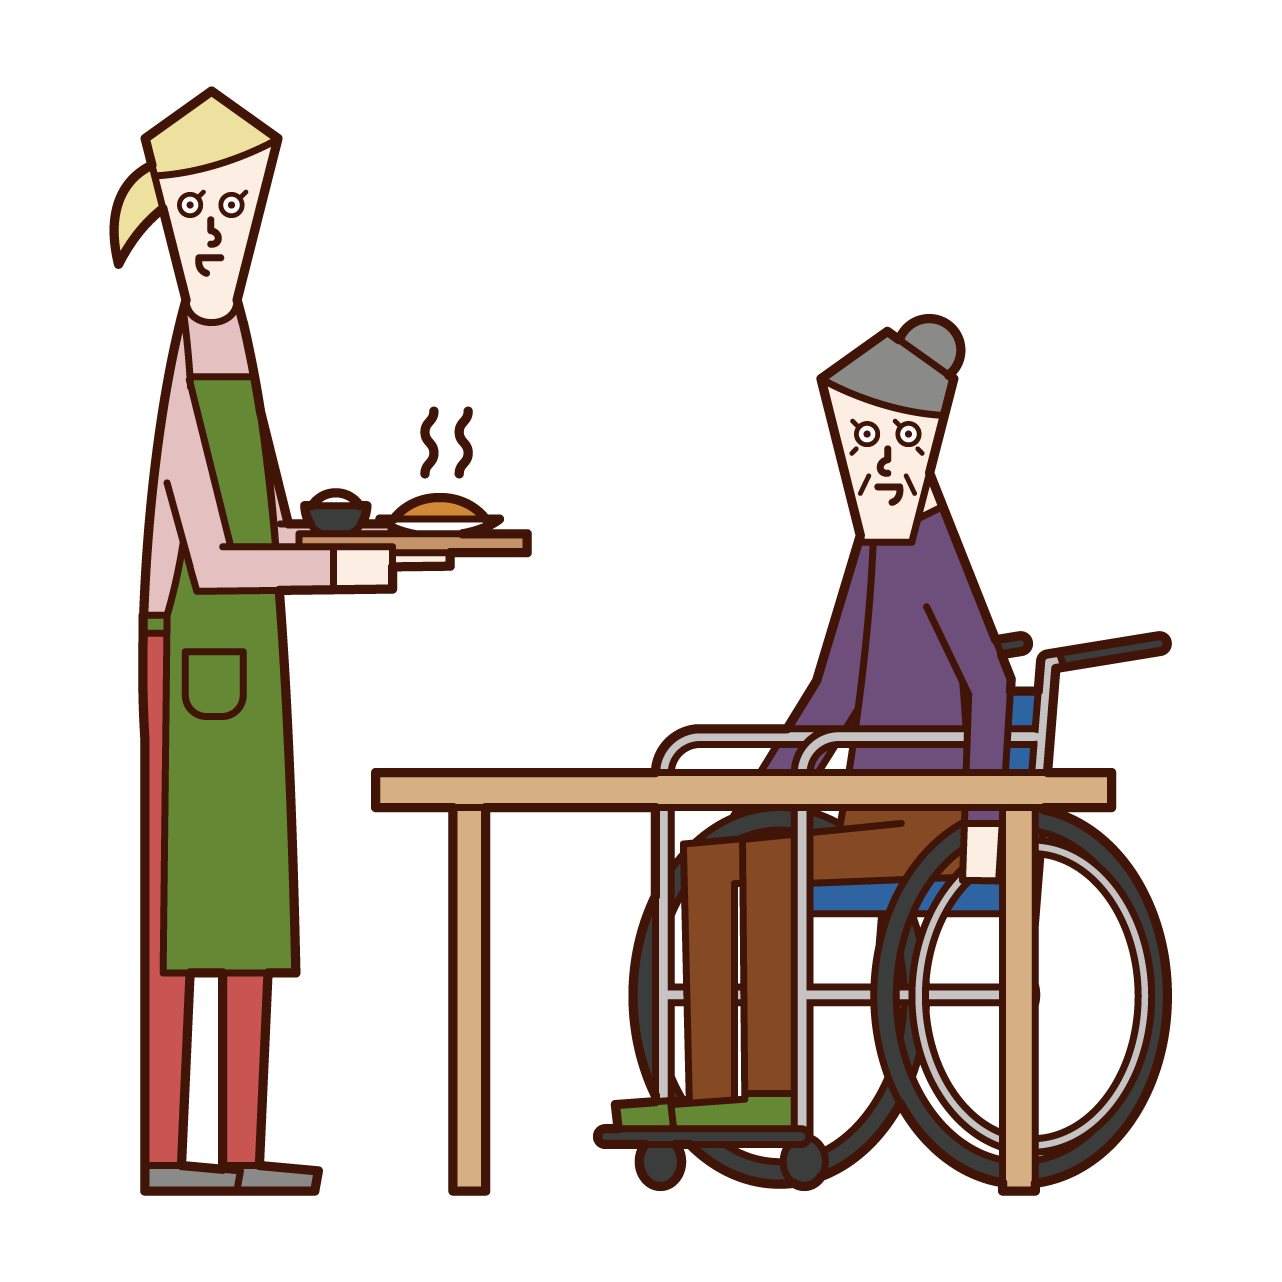 Illustration of care worker and home helper (woman) who prepares meals